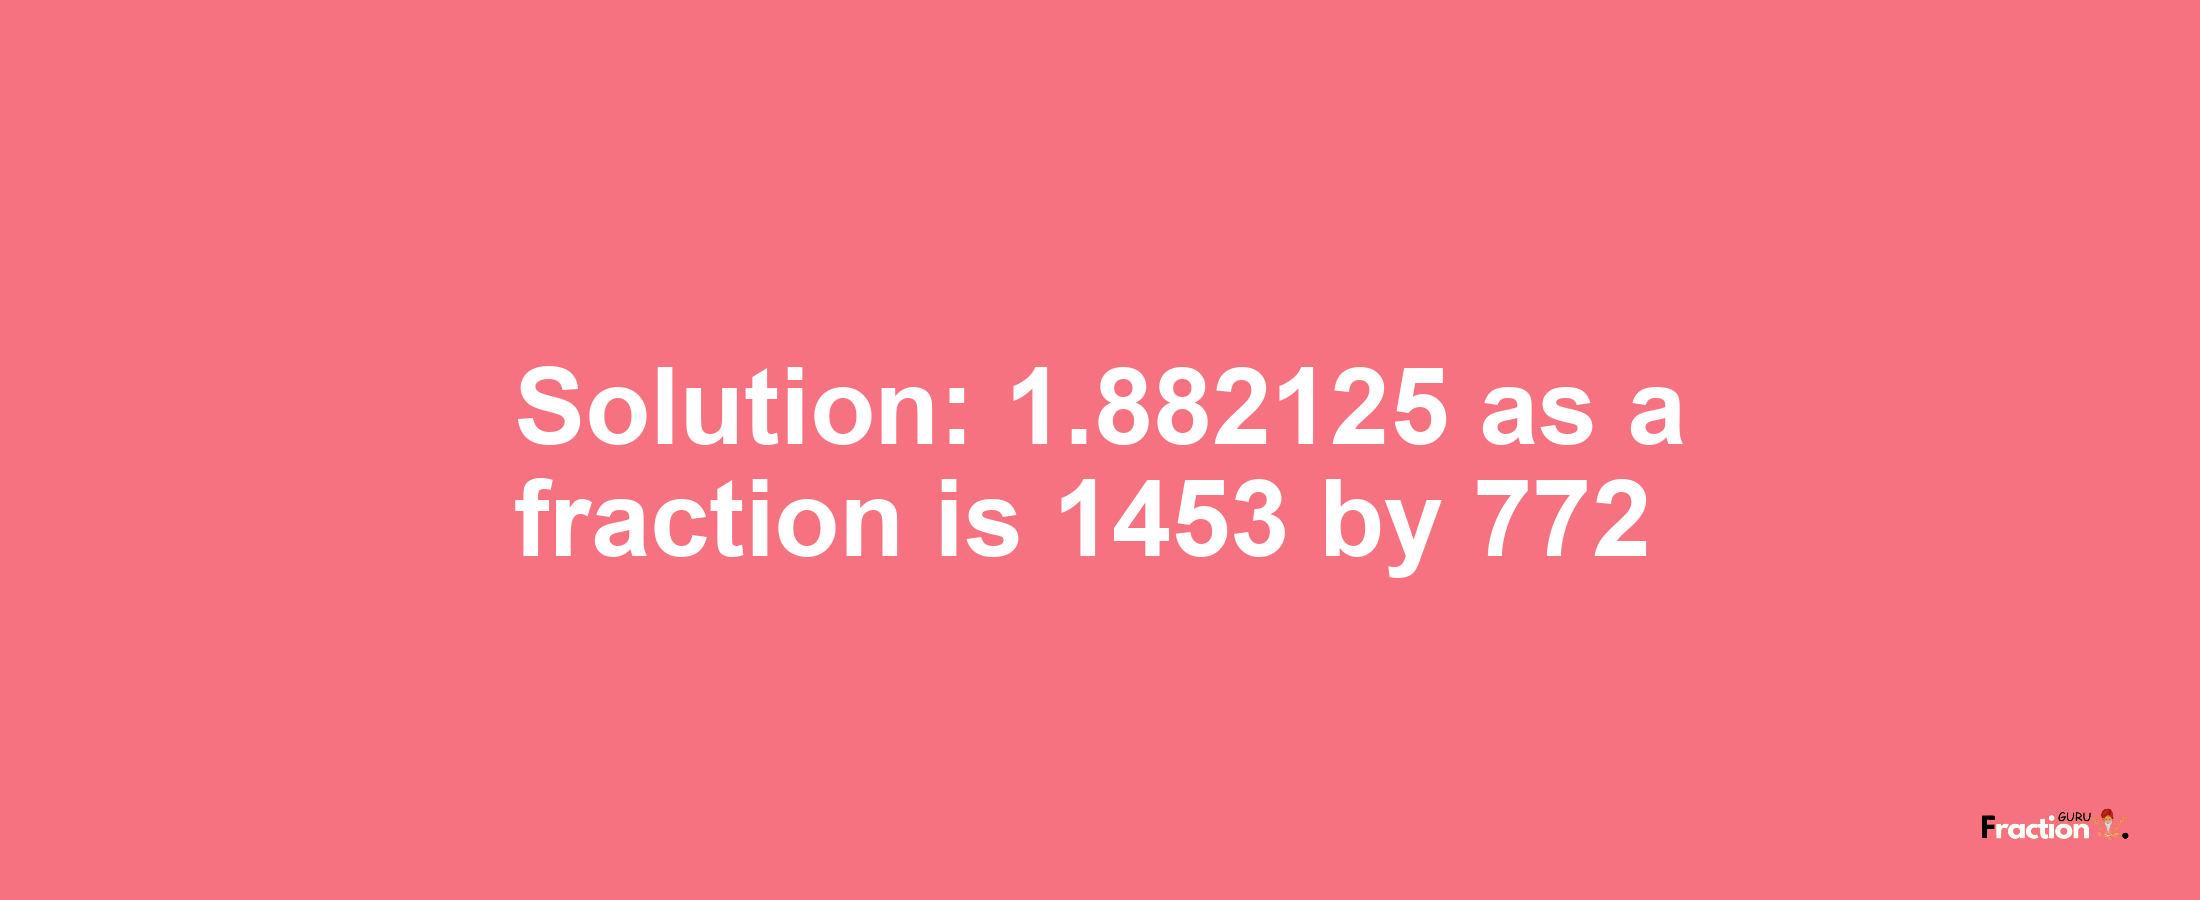 Solution:1.882125 as a fraction is 1453/772